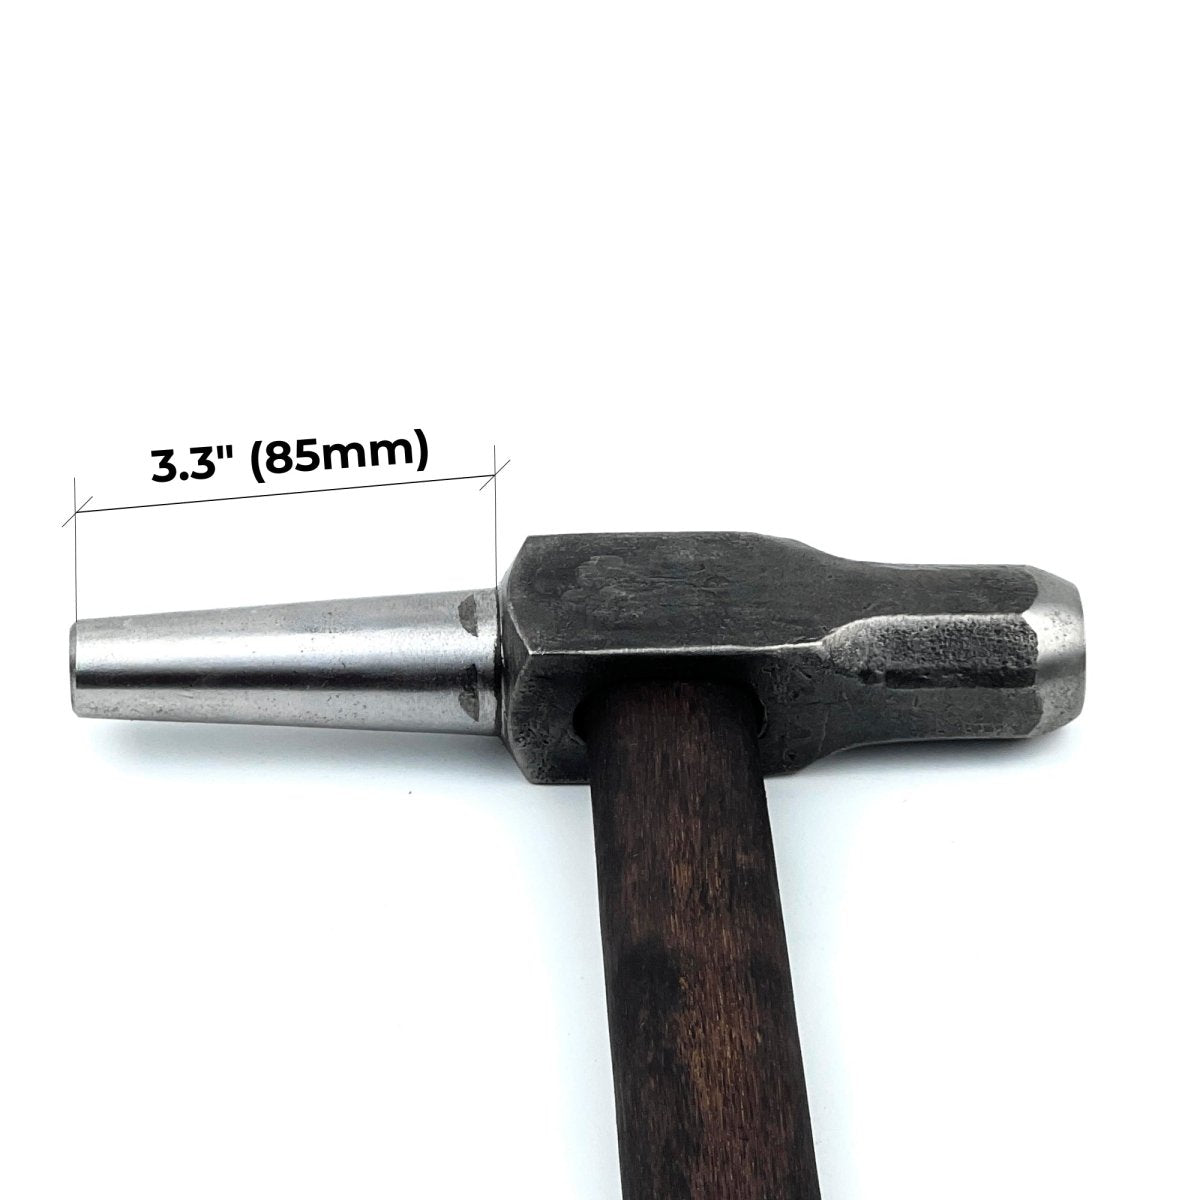 Hot punch square and round hammers - High-quality blacksmithing tools from AncientSmithy